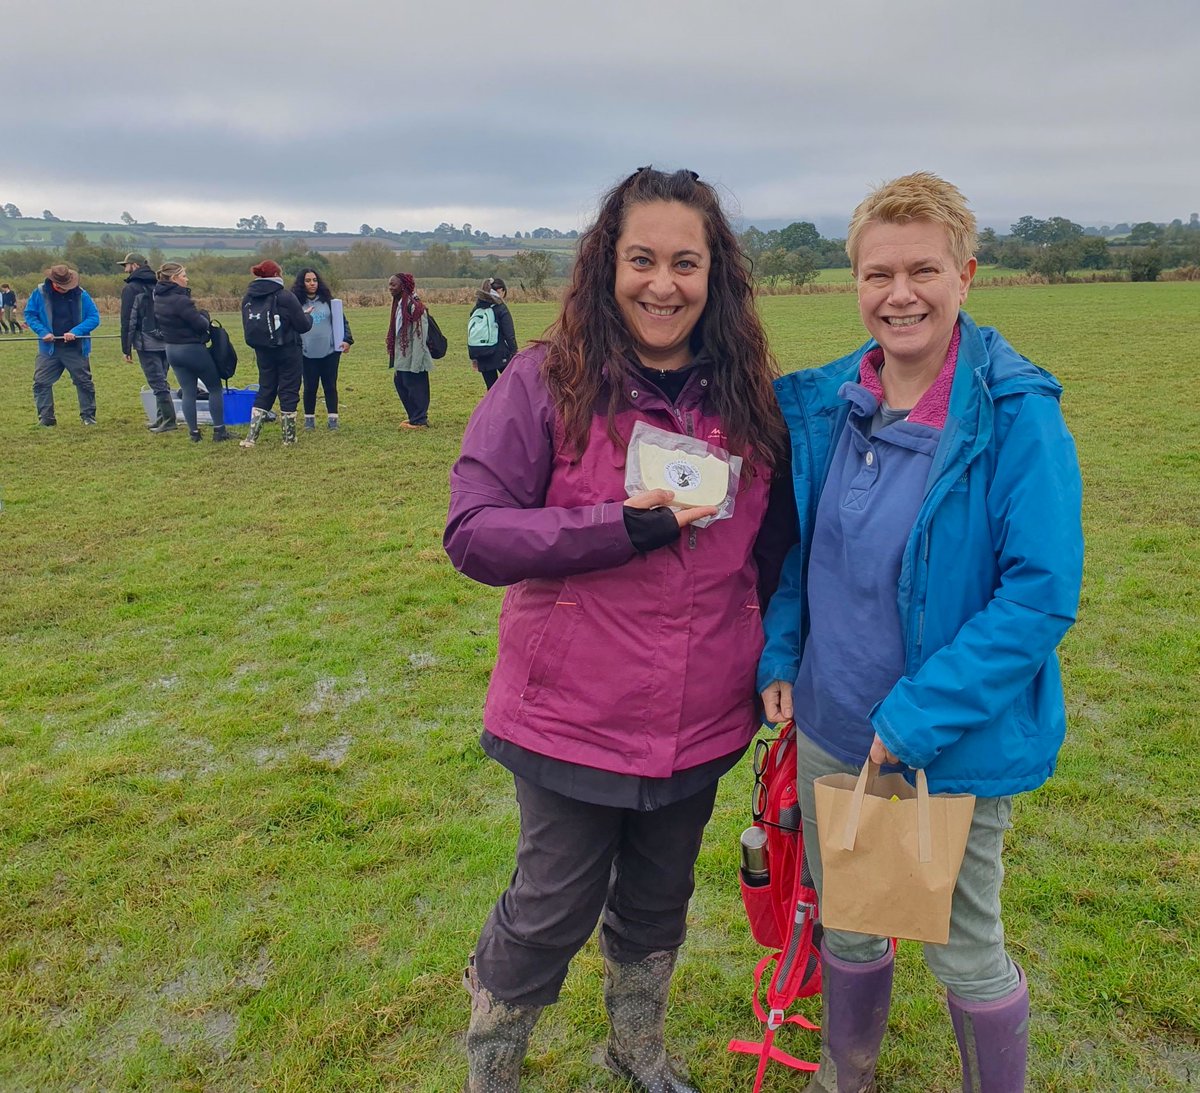 Returning to my palaeoecological roots for just a moment yesterday at Llangorse Lake. Meeting friend, Marta, after 8 years. I even named a cheese, Marta Gafr, after her! Manchego-style of course #welshfood #breconbeacons #breconbeaconsnationalpark #RHULGeography #artisancheese